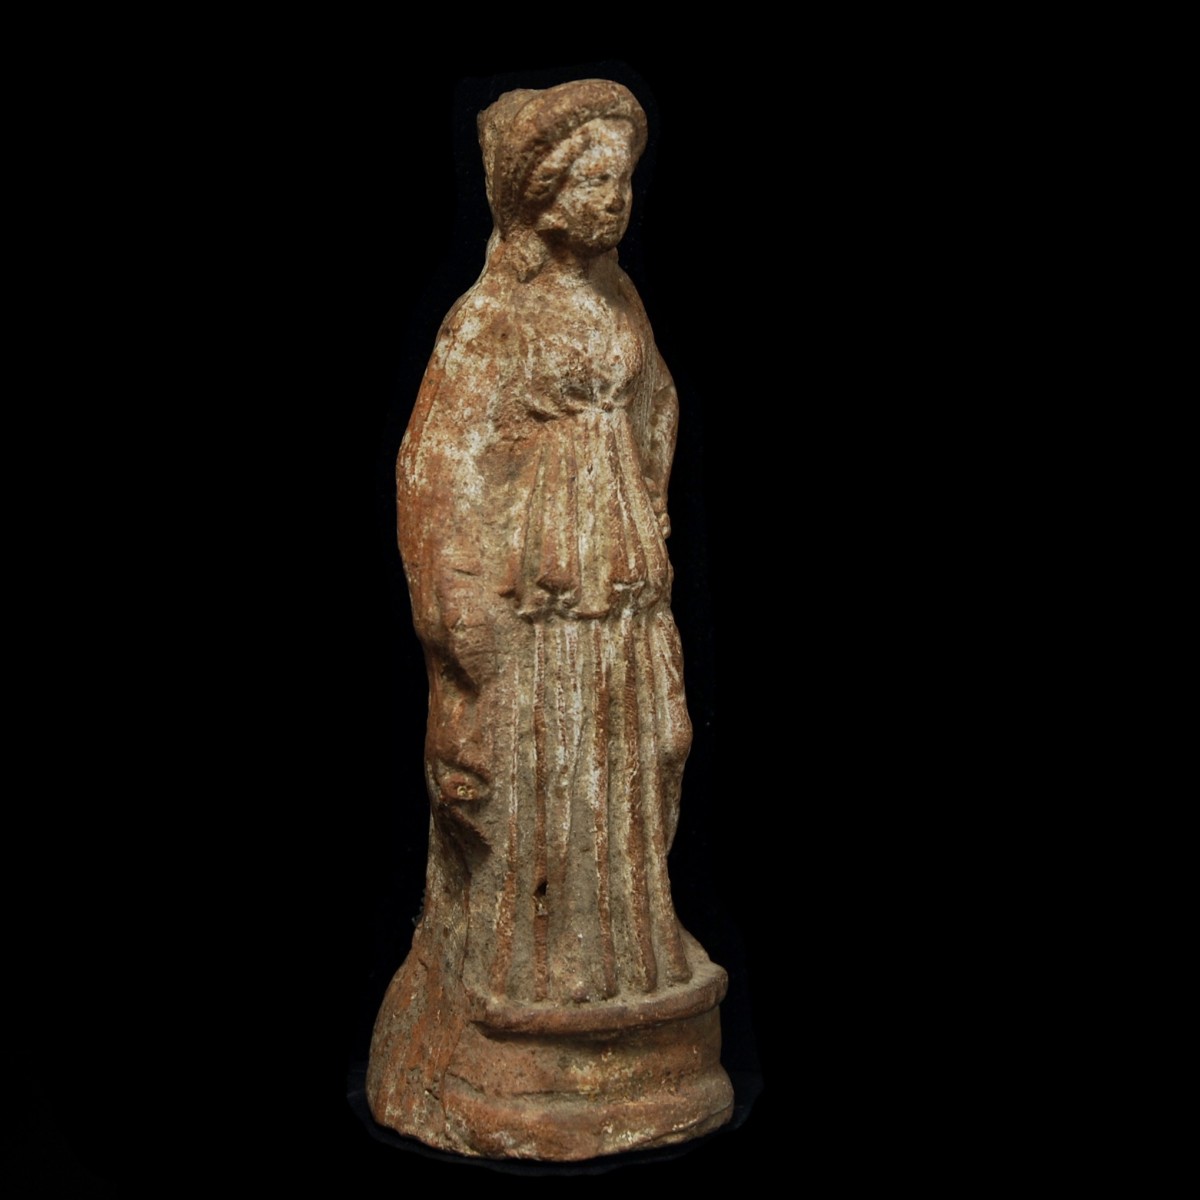 Cypriot terracotta statue of a woman half right